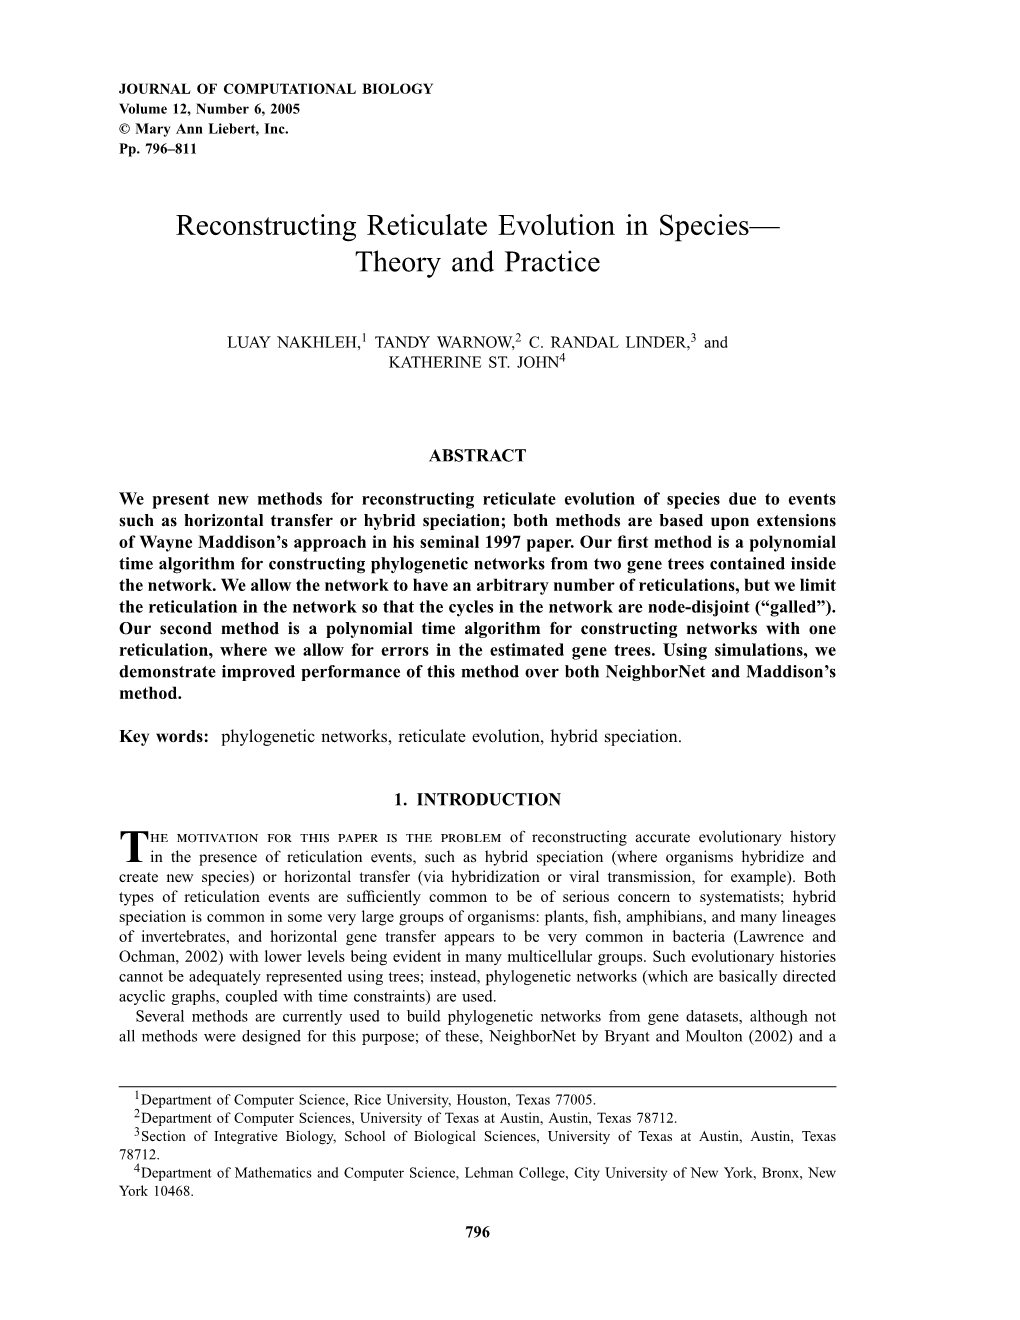 Reconstructing Reticulate Evolution in Species— Theory and Practice